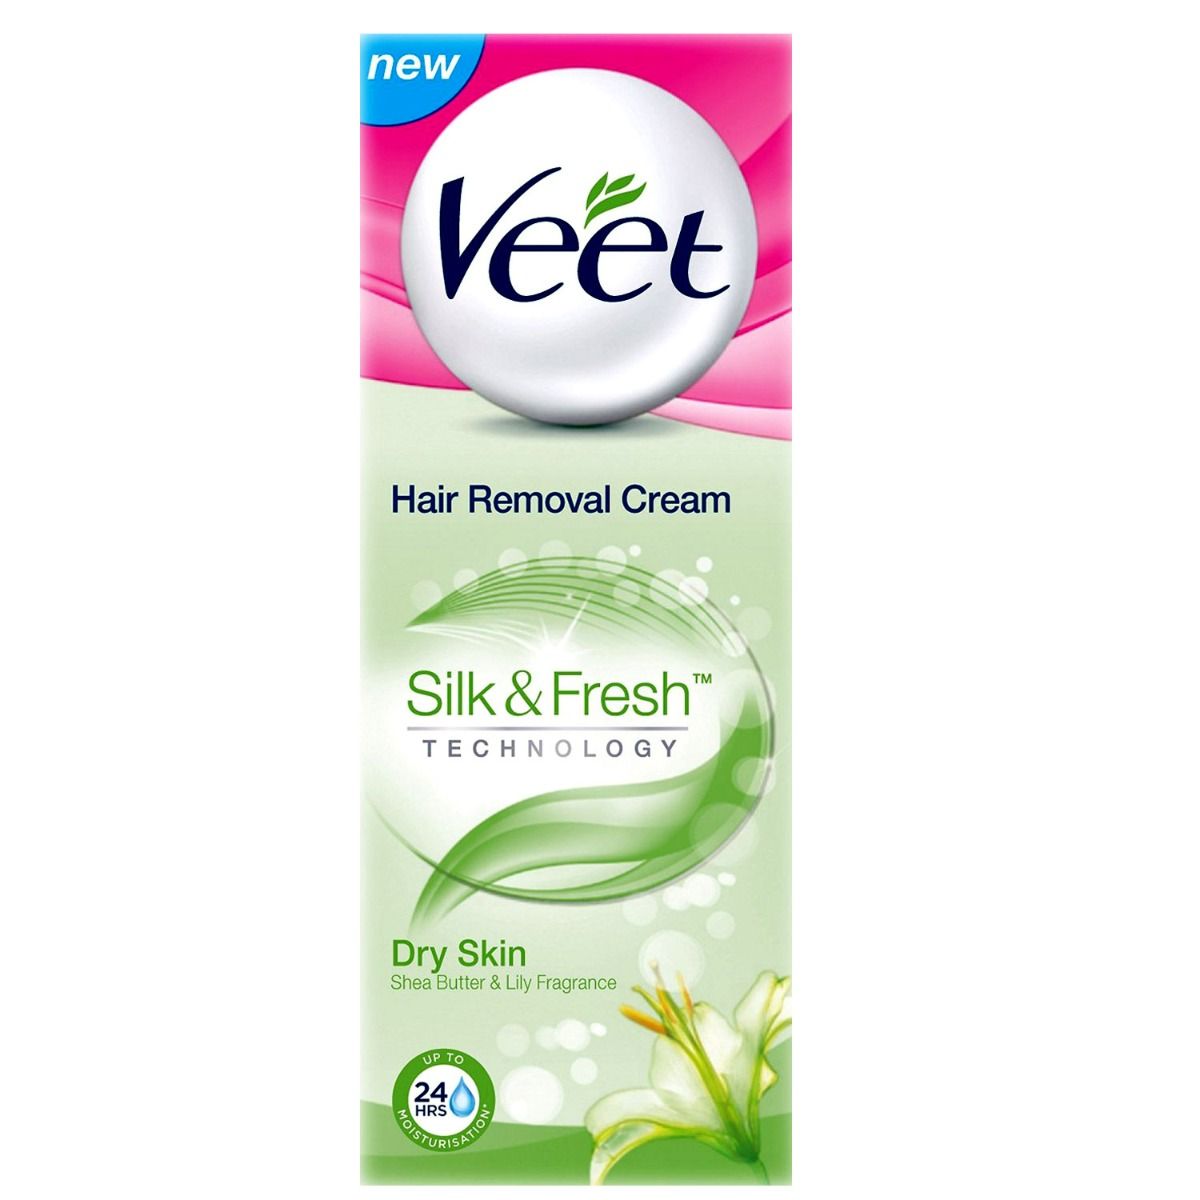 Veet Pure Hair Removal Cream for Women with No Ammonia Smell Normal Skin  Buy tube of 30 gm Cream at best price in India  1mg